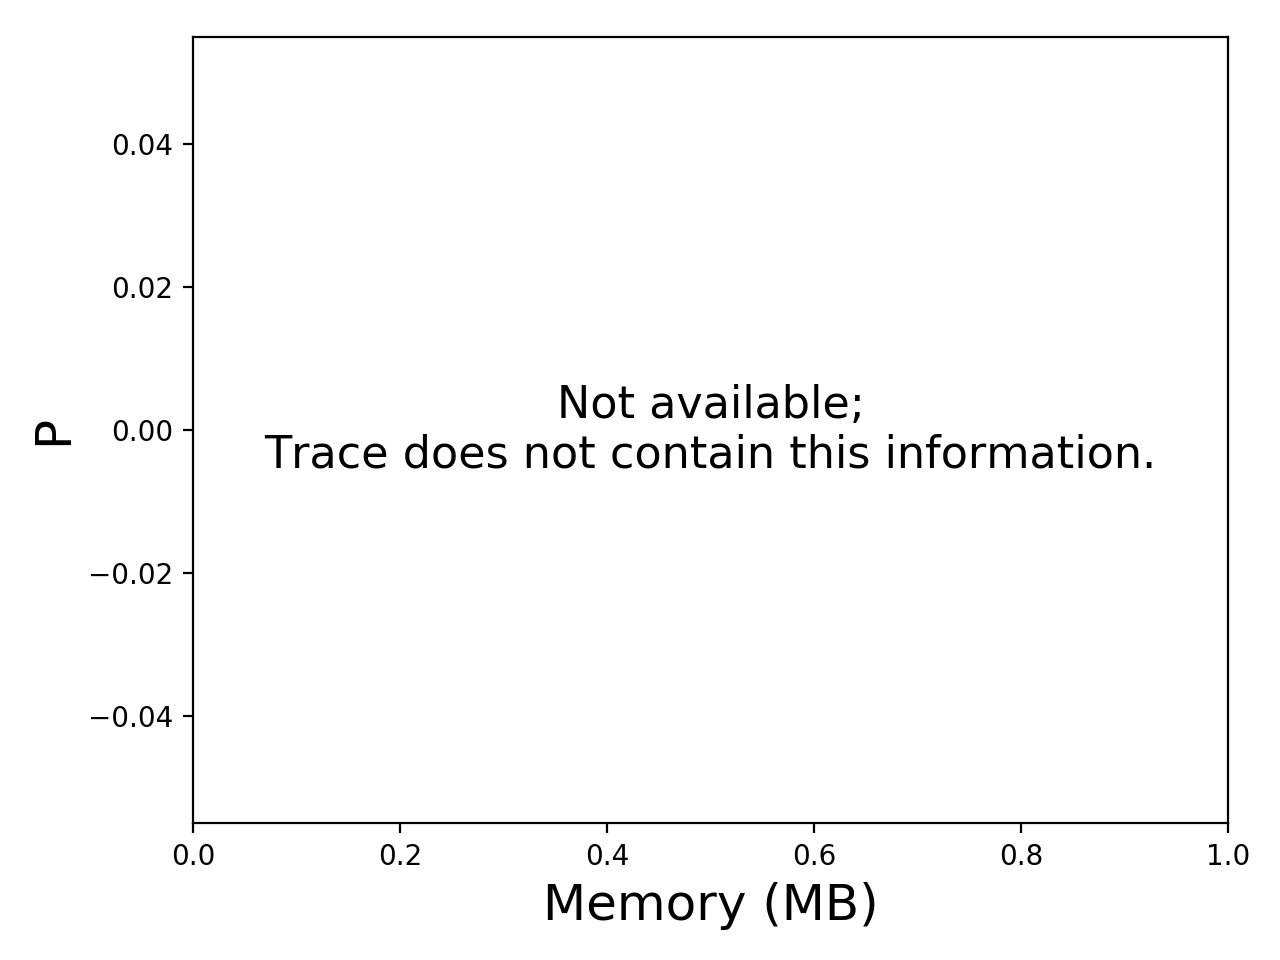 Task memory consumption graph for the spec_trace-1 trace.